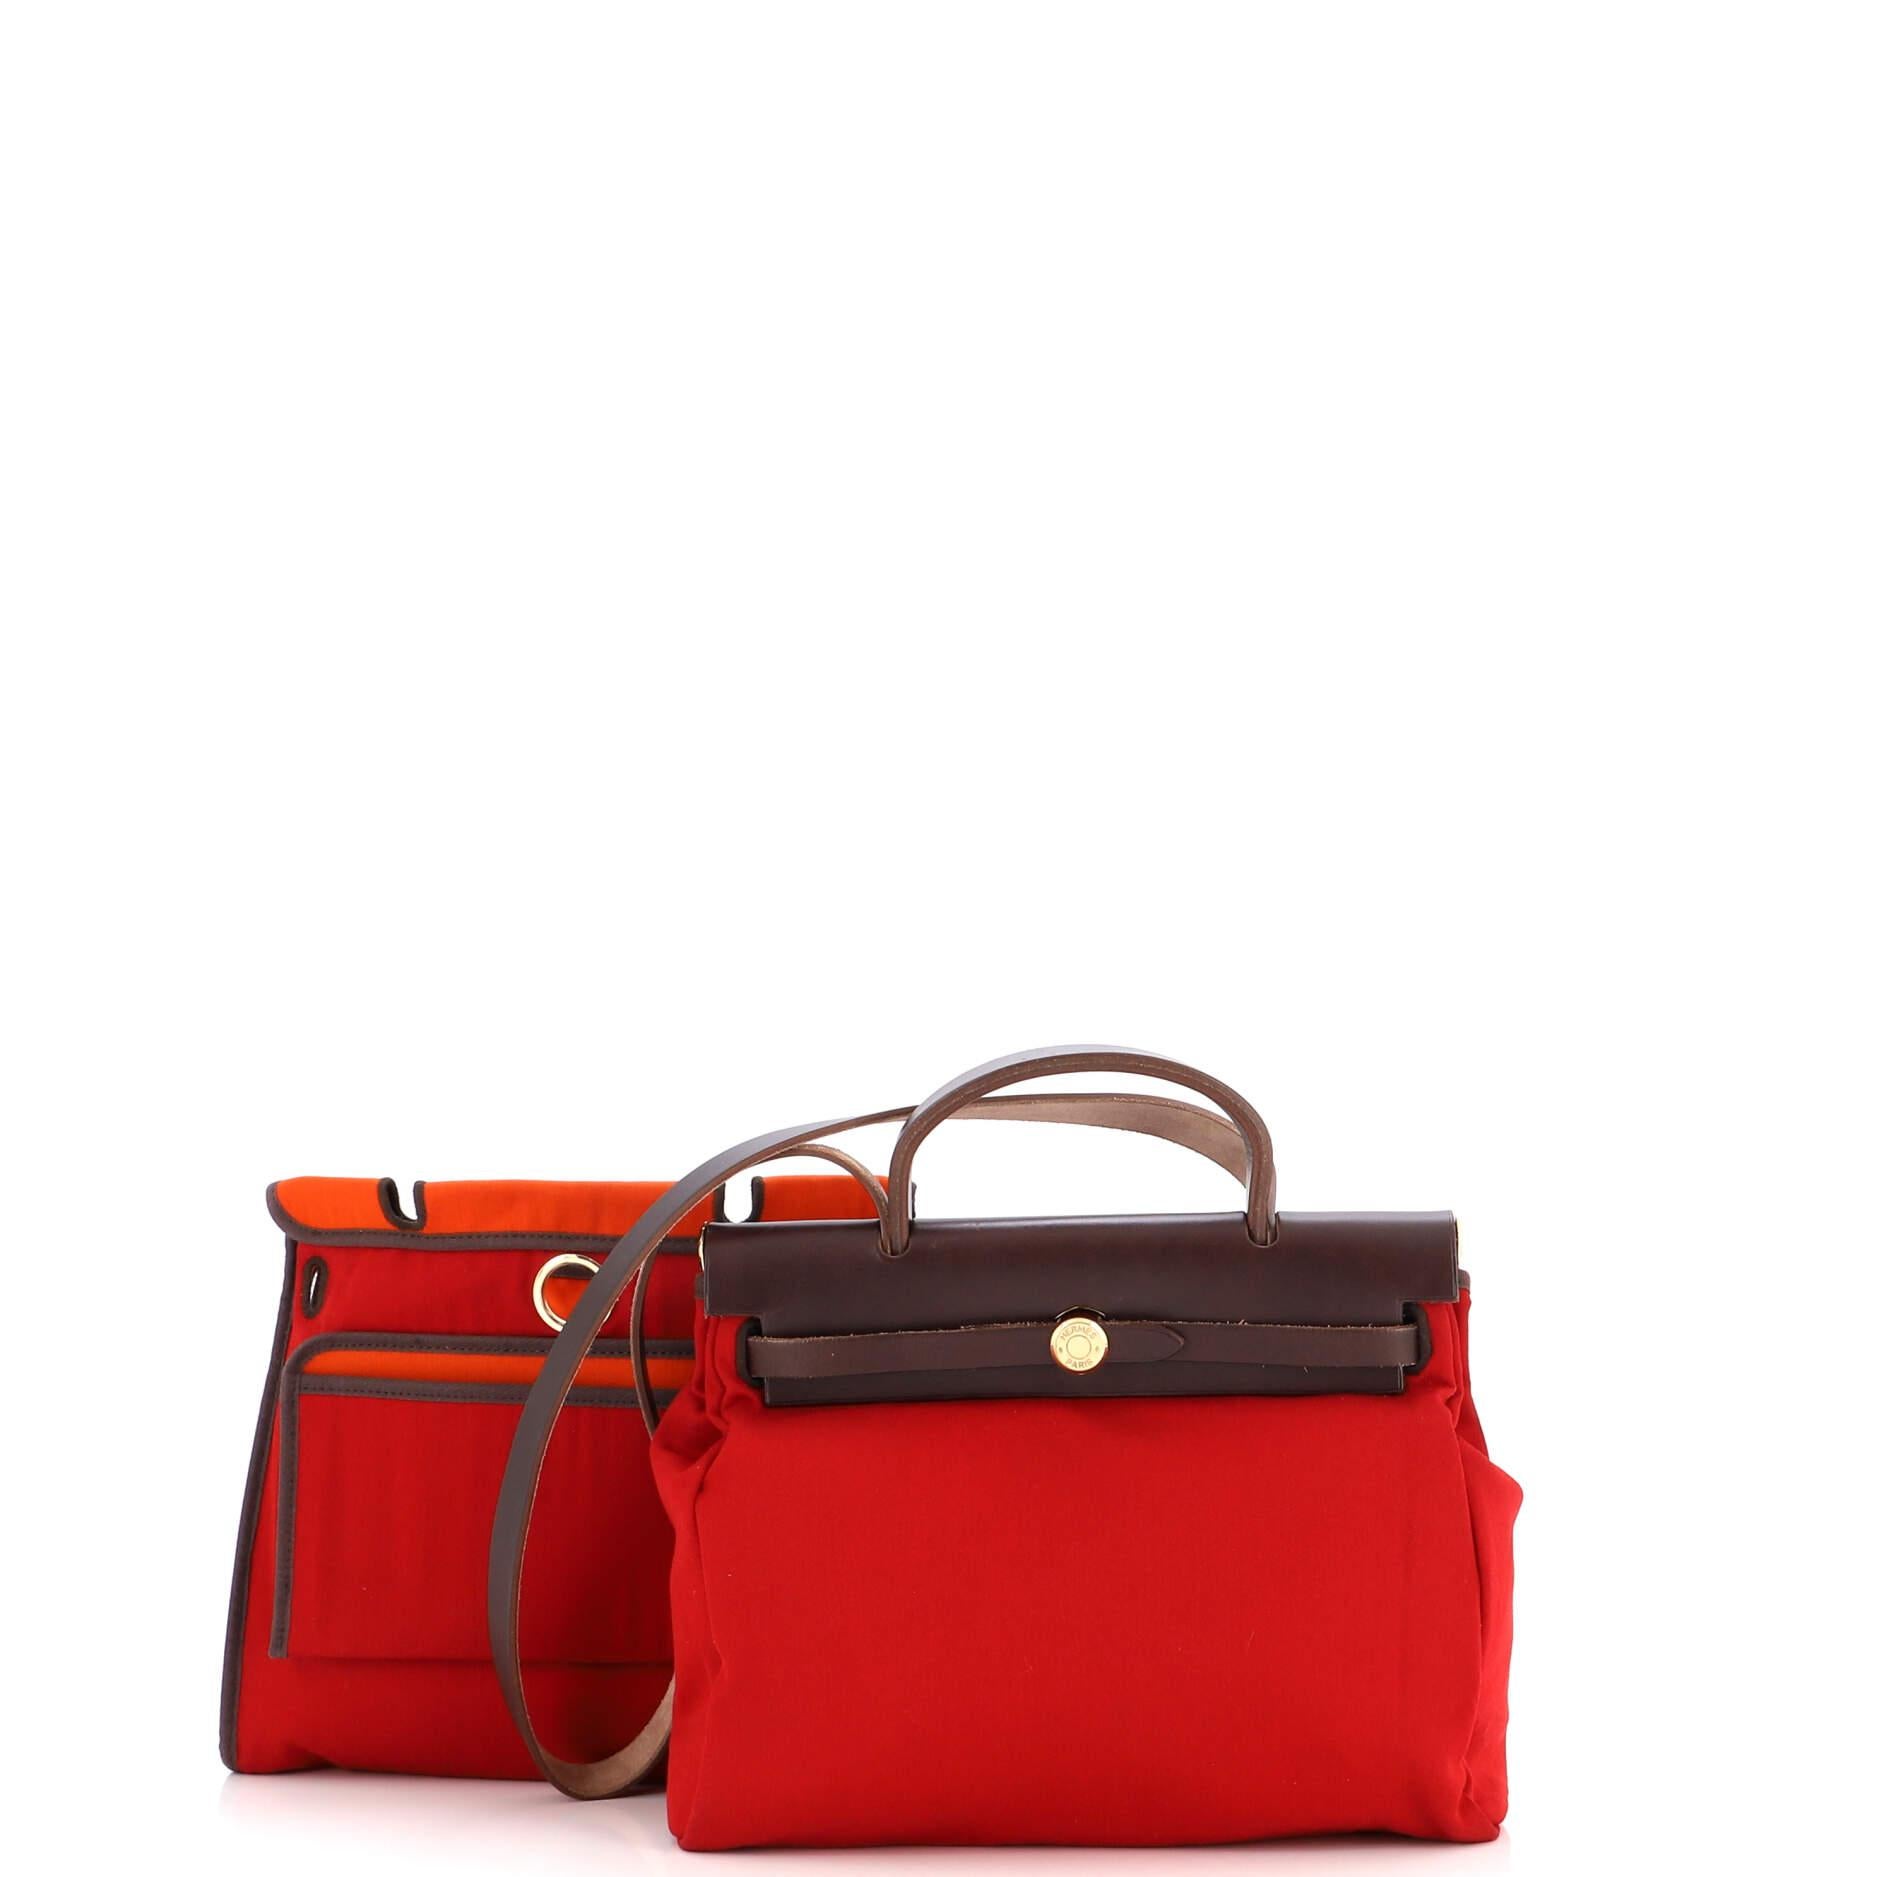 Sold at Auction: HERMES CHANGEABLE 'HERBAG PM' IN TWO SIZES